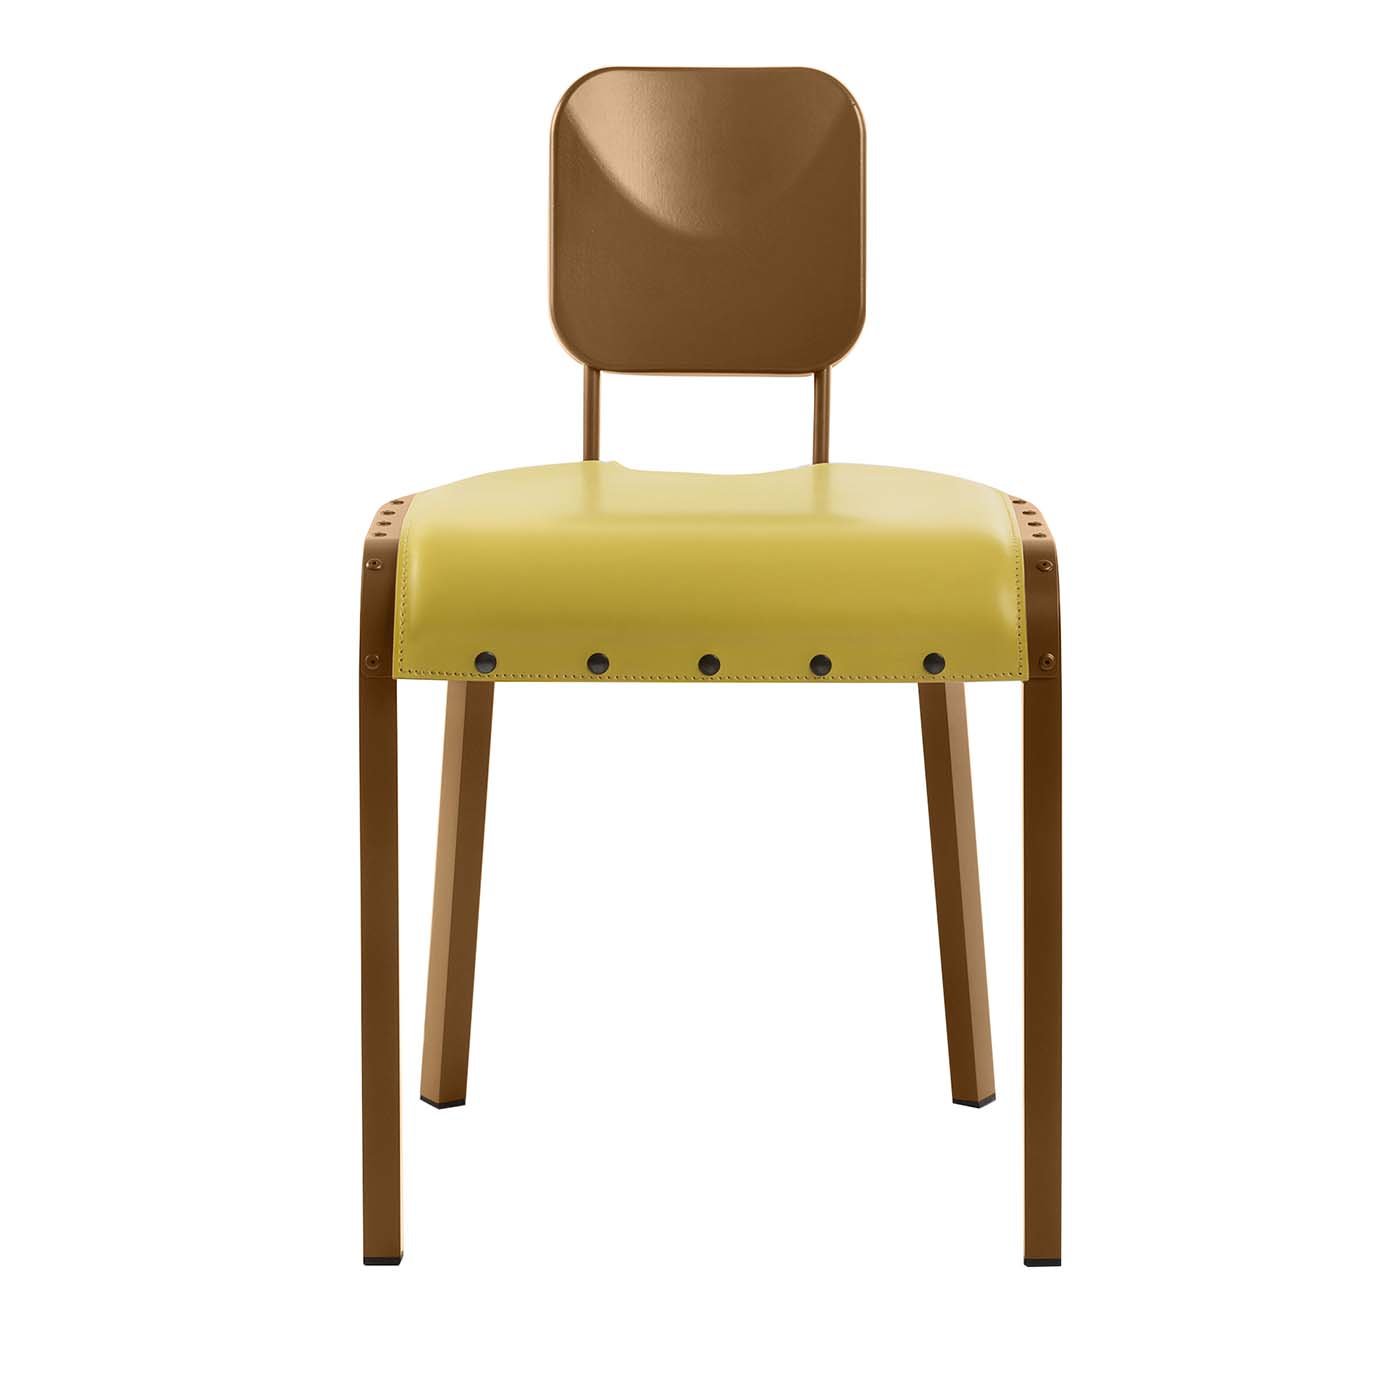 Rock4 Chair with Yellow Leather Seat by Marc Sadler - Main view